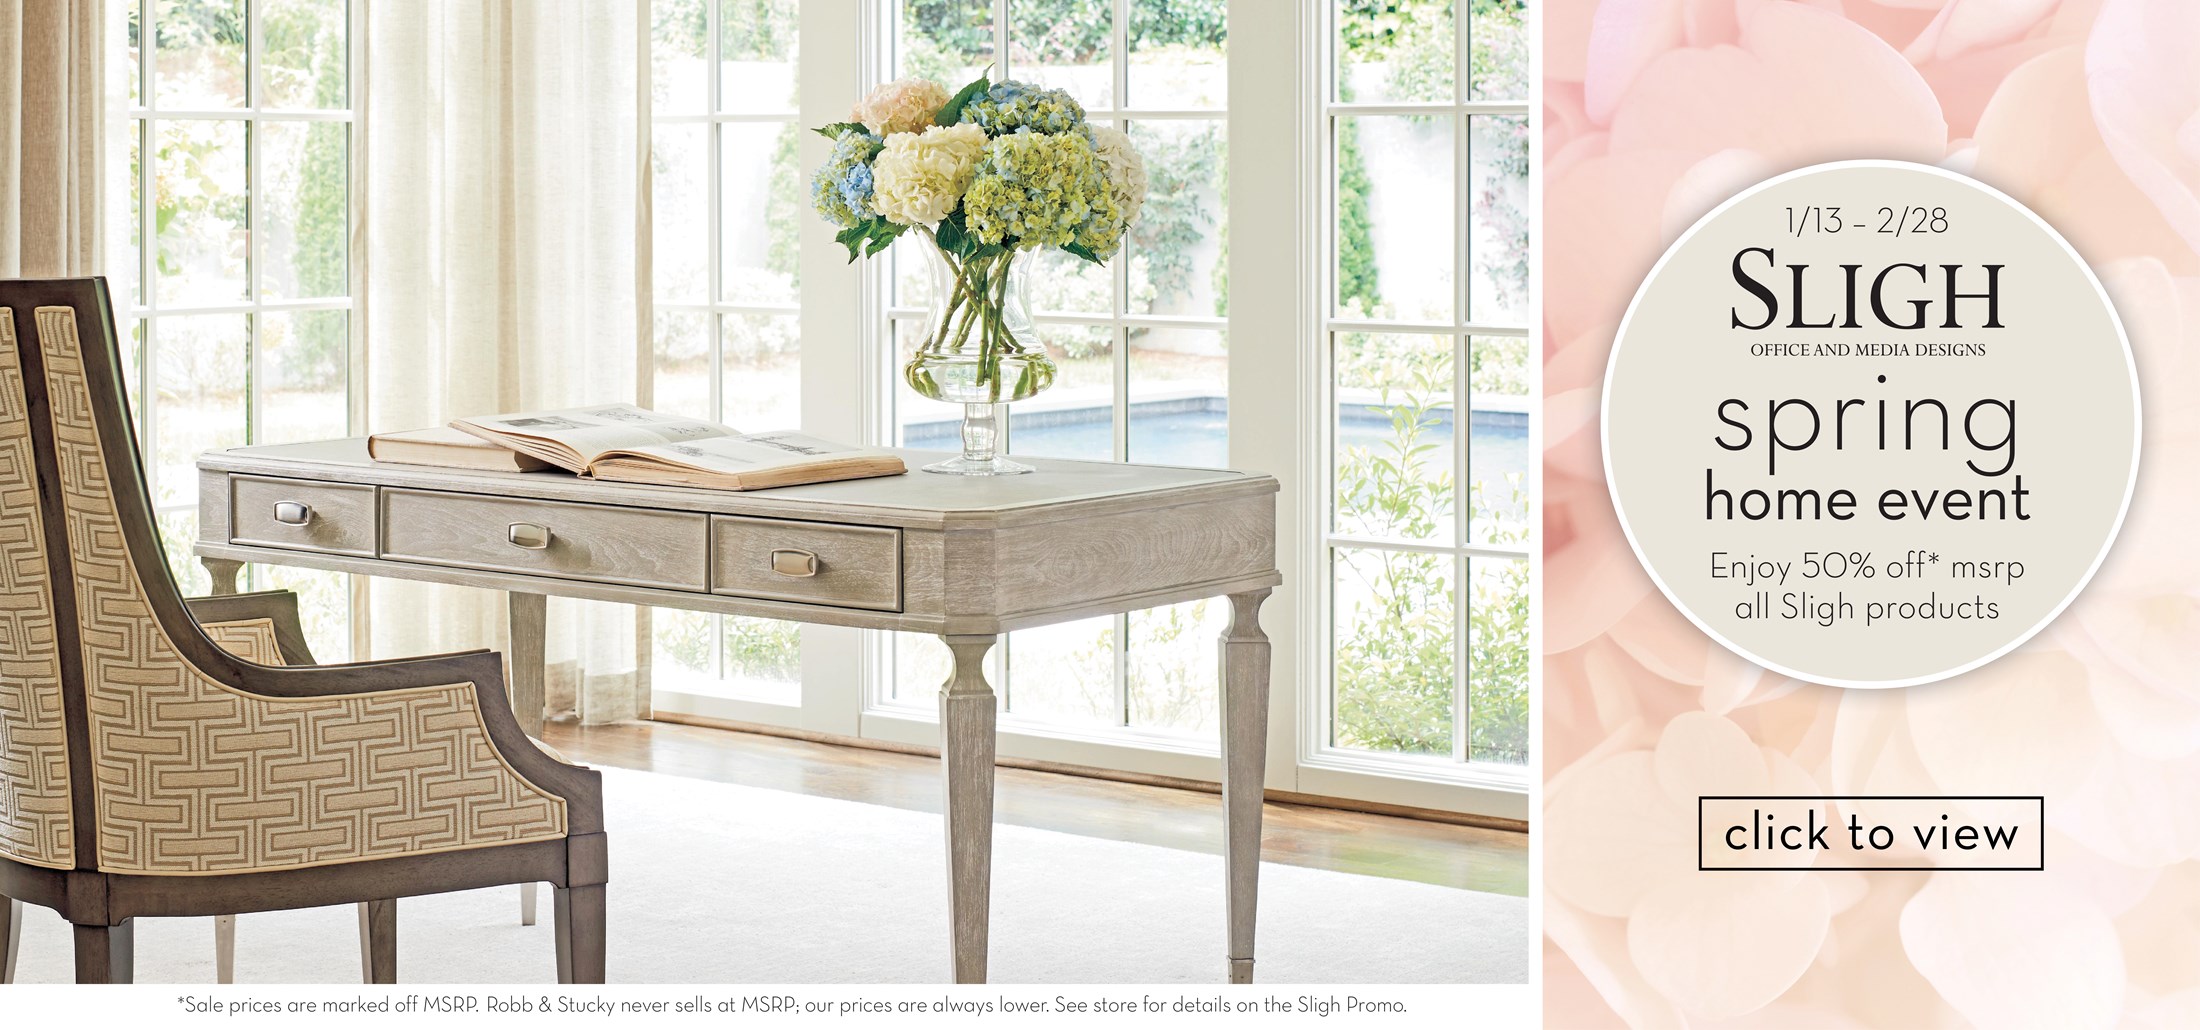 Image of a Sligh Desk with chair and hydrangea flowers. Text: 1/13-2/28. Sligh office and media designs. Spring home event. Enjoy 50% off* msrp all Sligh products. *Sale prices are marked off MSRP. Robb & Stucky never sells at MSRP;  our prices are always lower. See store for details on the Sligh Promo. Links to event. 